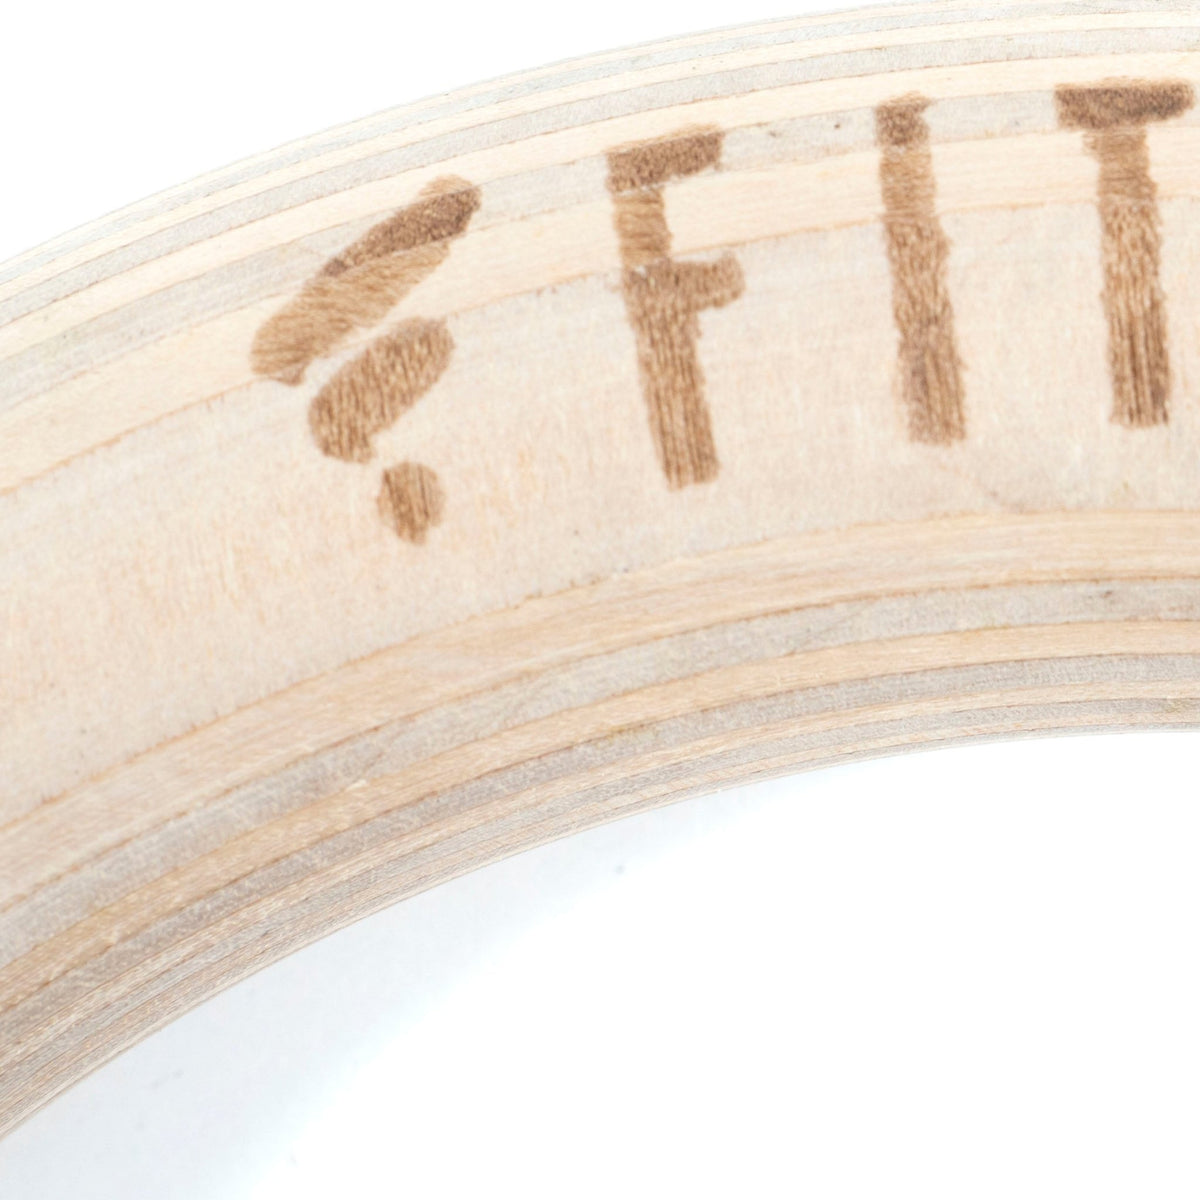 FitWay Equip. Gymnastic Rings - Basic Wood - Fitness Experience